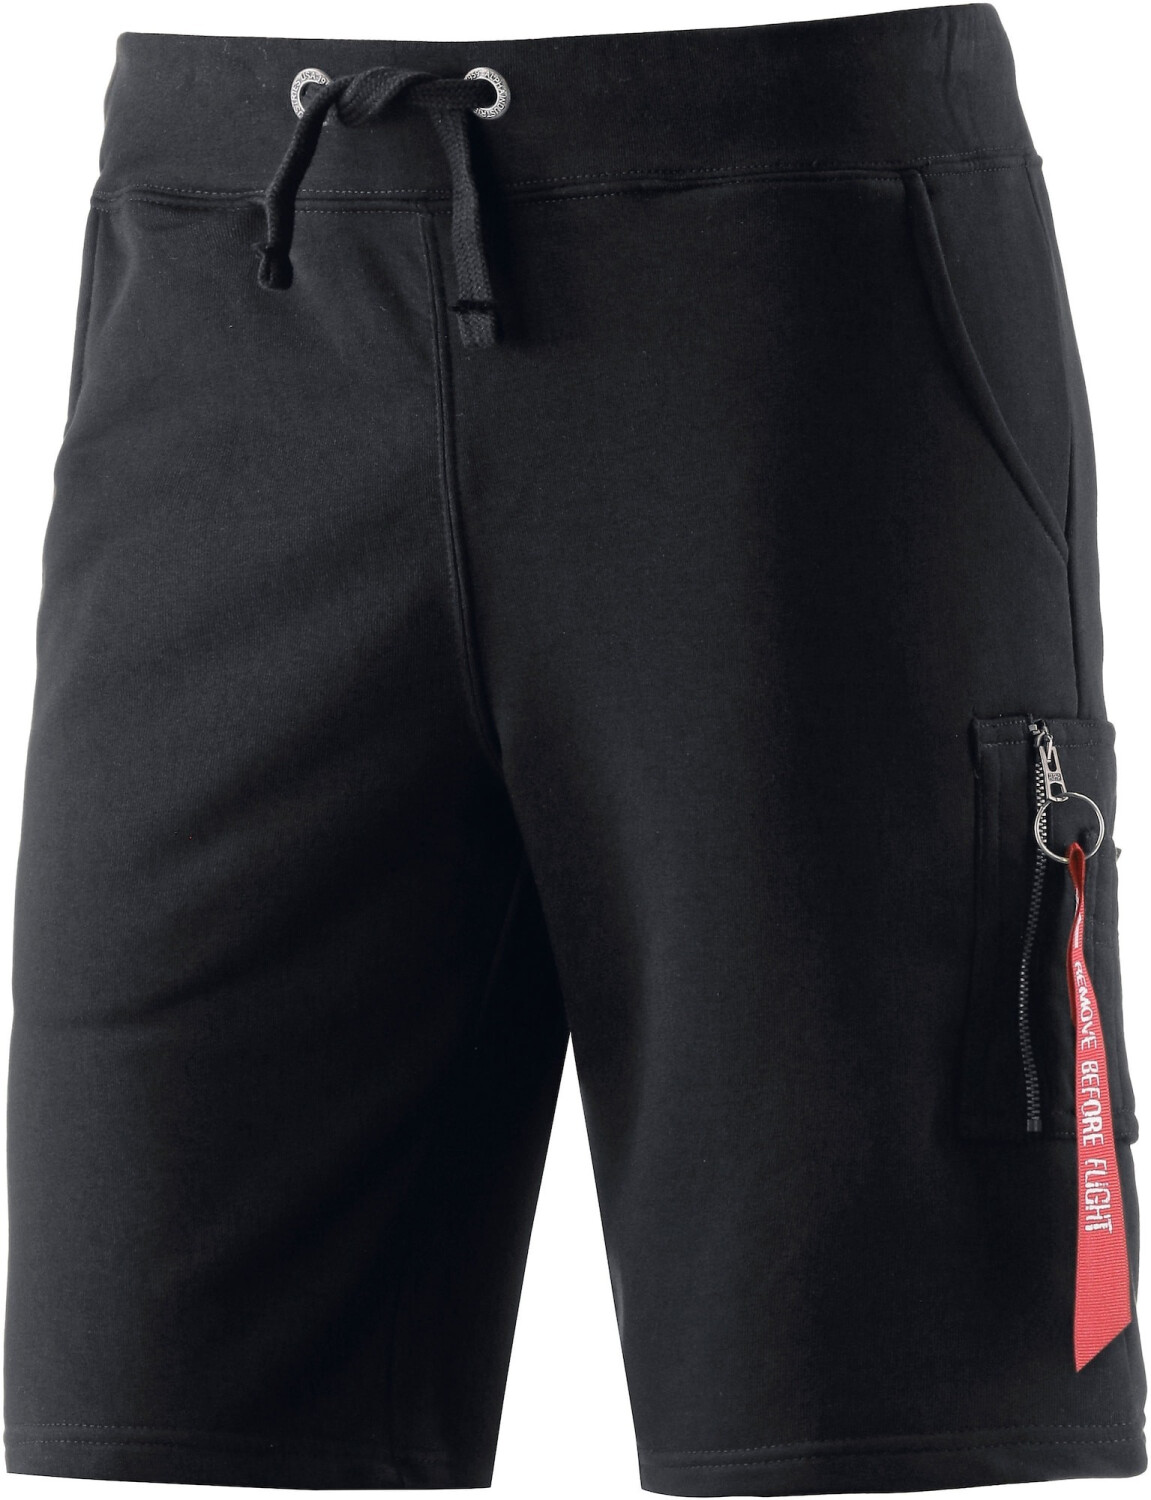 Buy Alpha Industries X-Fit £23.65 from on Deals (Today) – Men\'s (166301) Best Shorts